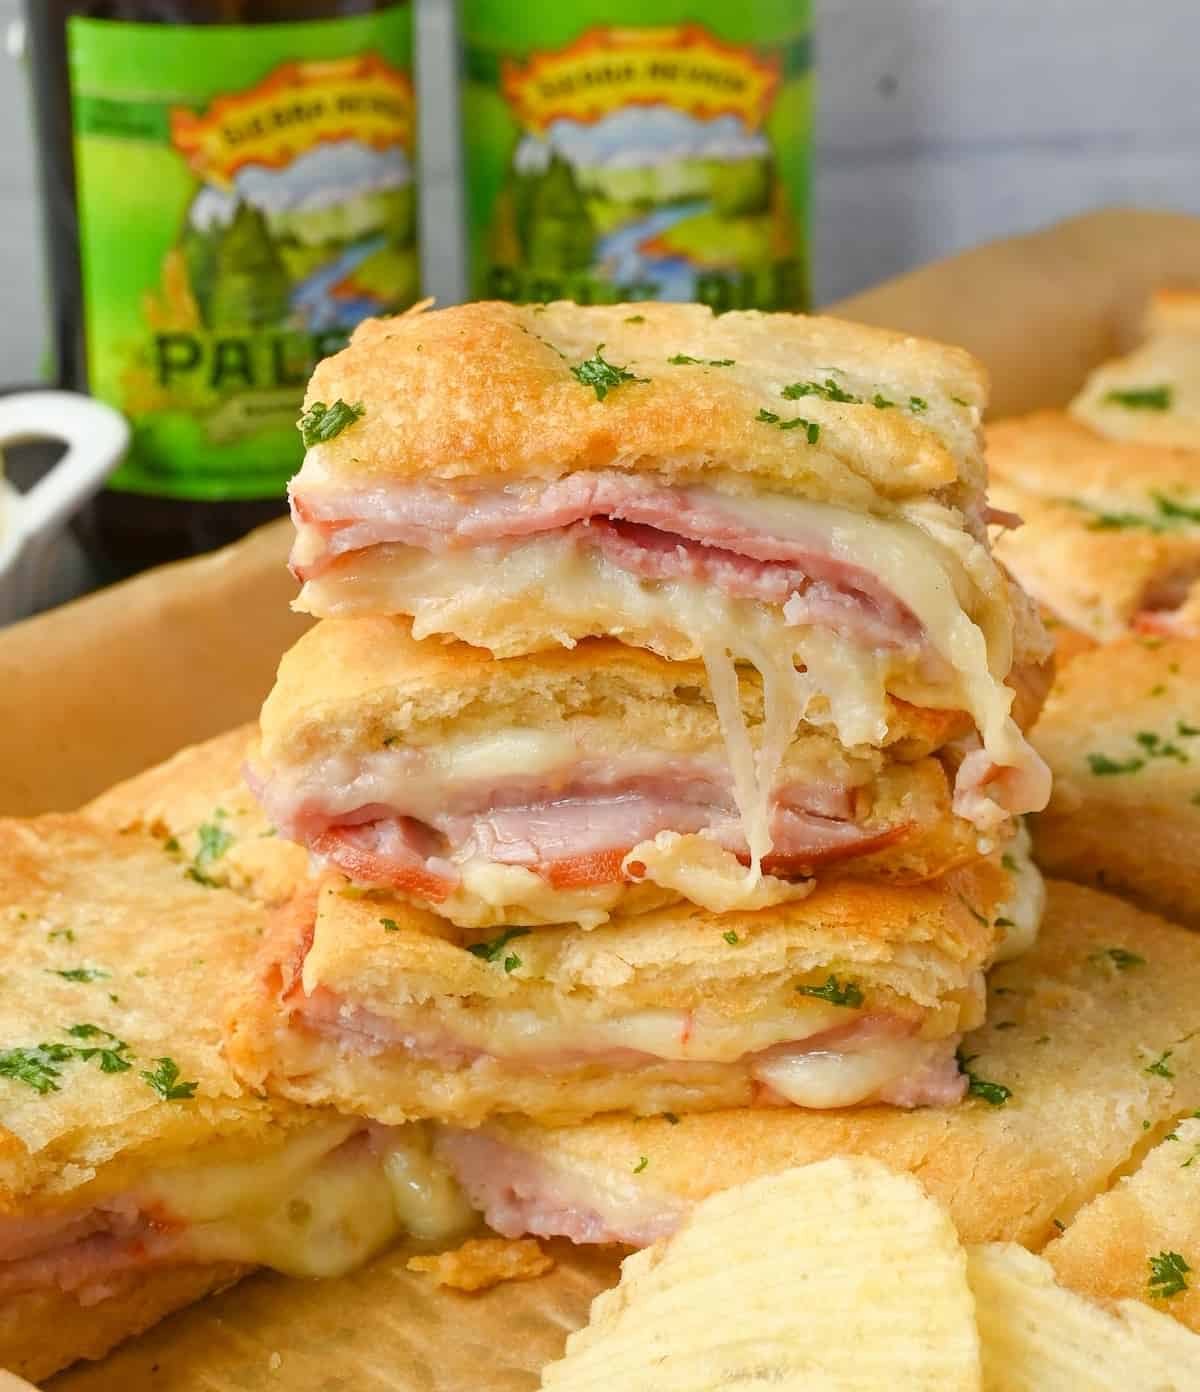 A stack of hot ham sandwiches.